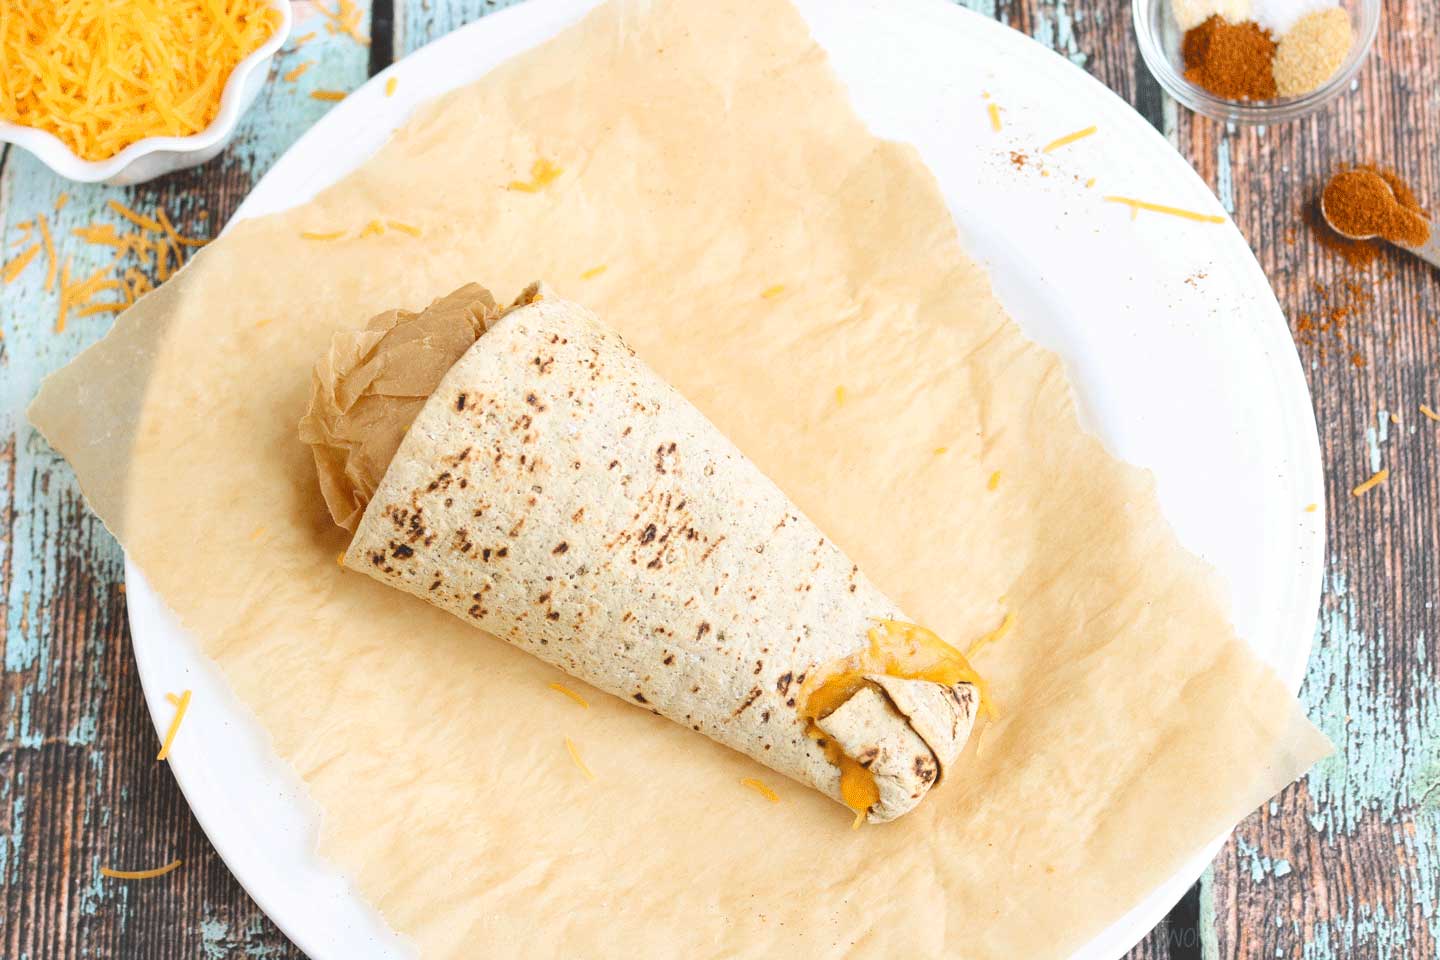 Then, fold the tip of the cone up and secure it in the melted cheese. Presto … you just made your very own DIY Taco Cone!